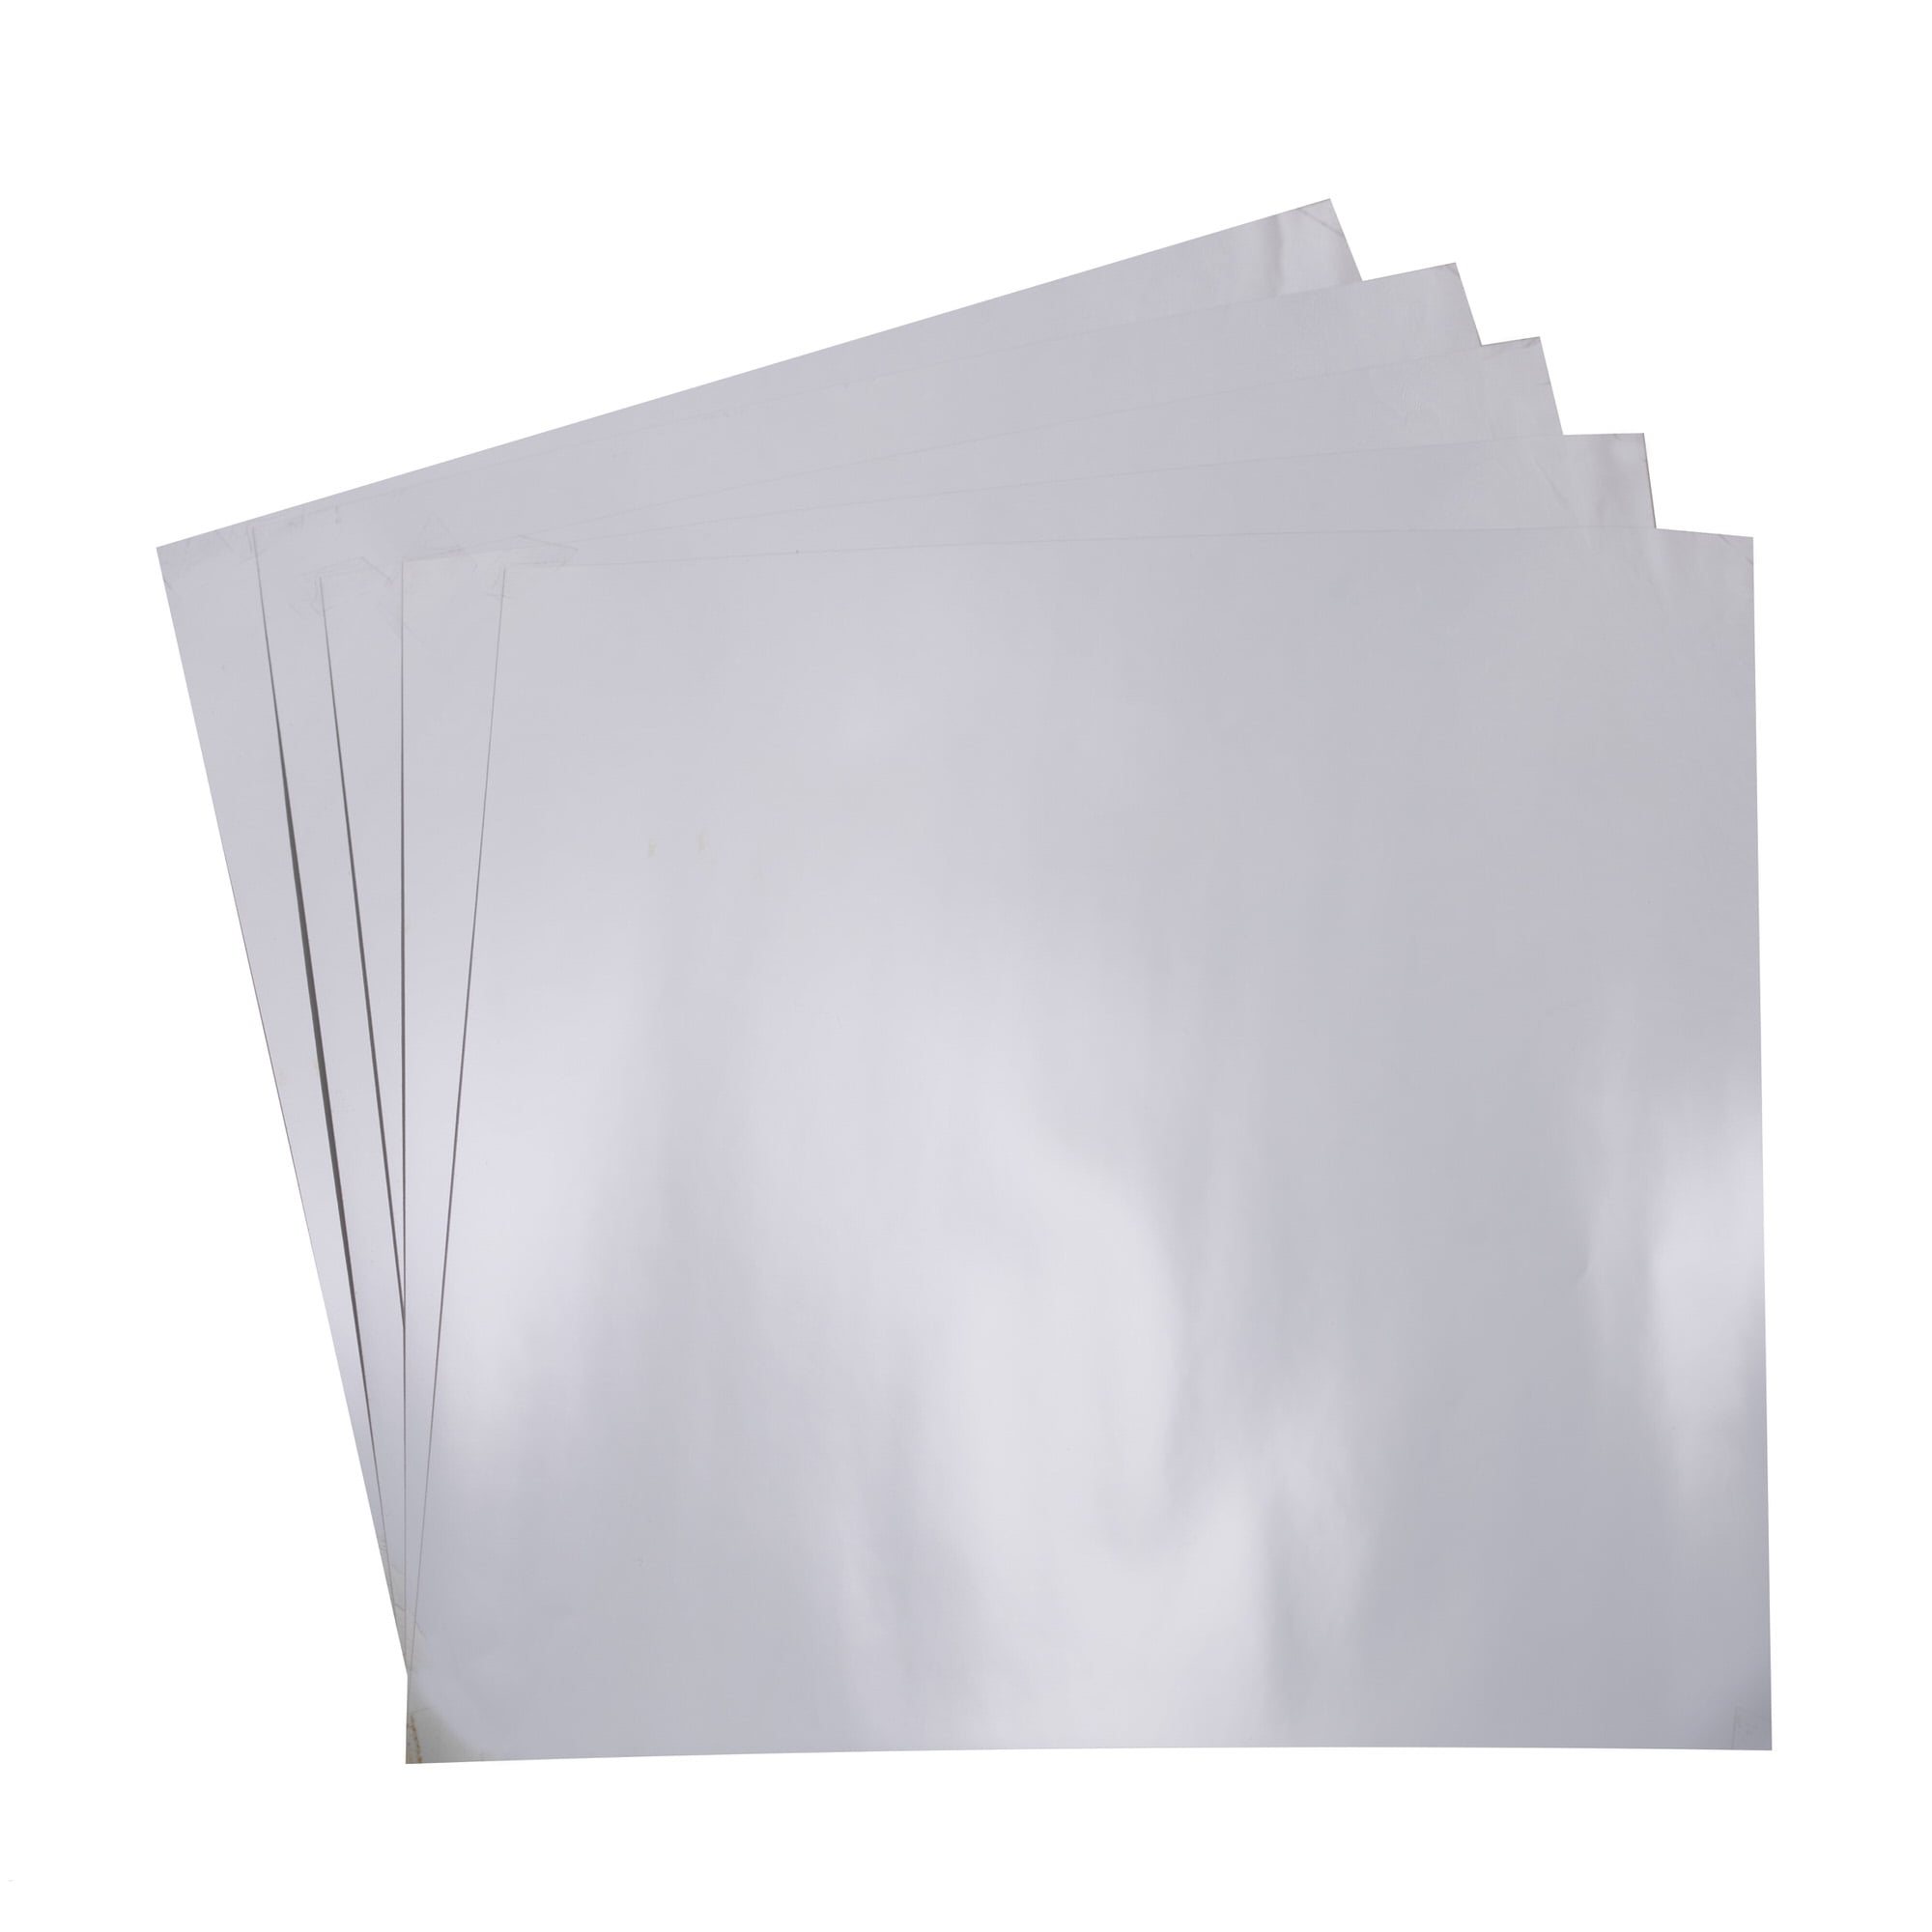 Reflective Adhesive Craft Vinyl Sheet 12 x 24 for Silhouette, Cricut and  Cameo (White Reflective)